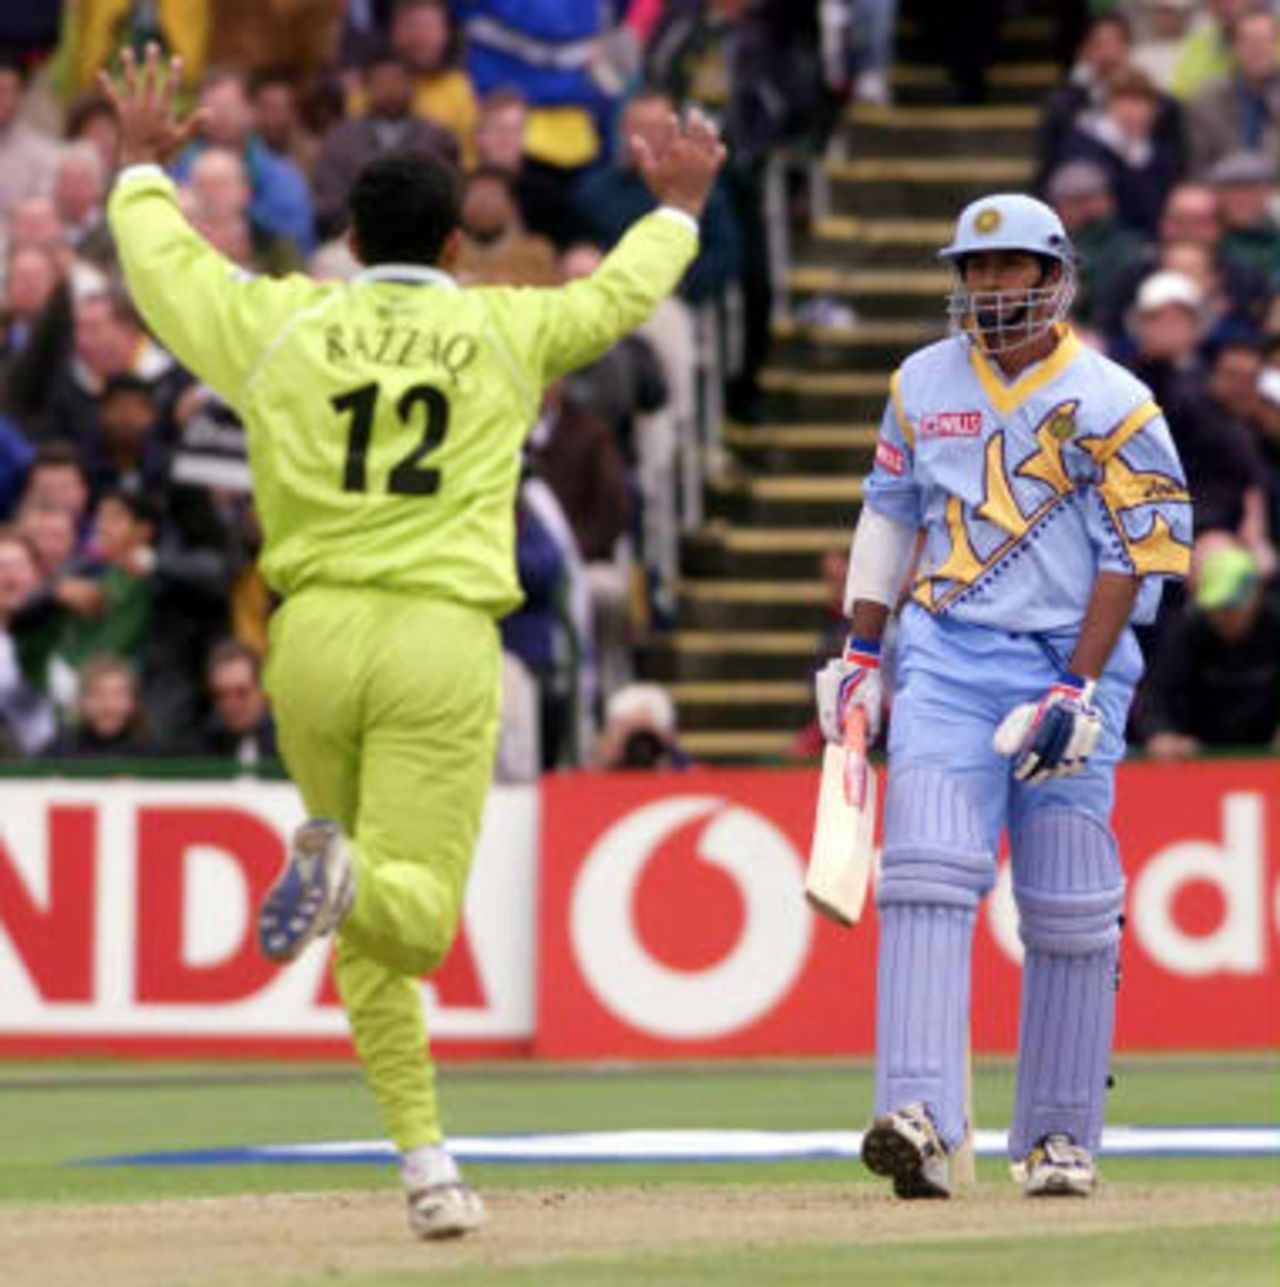 India's opening batsman Sadagopan Ramesh (R) out, bowled Abdur Razzaq 08 June 1999, during the Cricket World Cup match at Old Trafford, Manchester